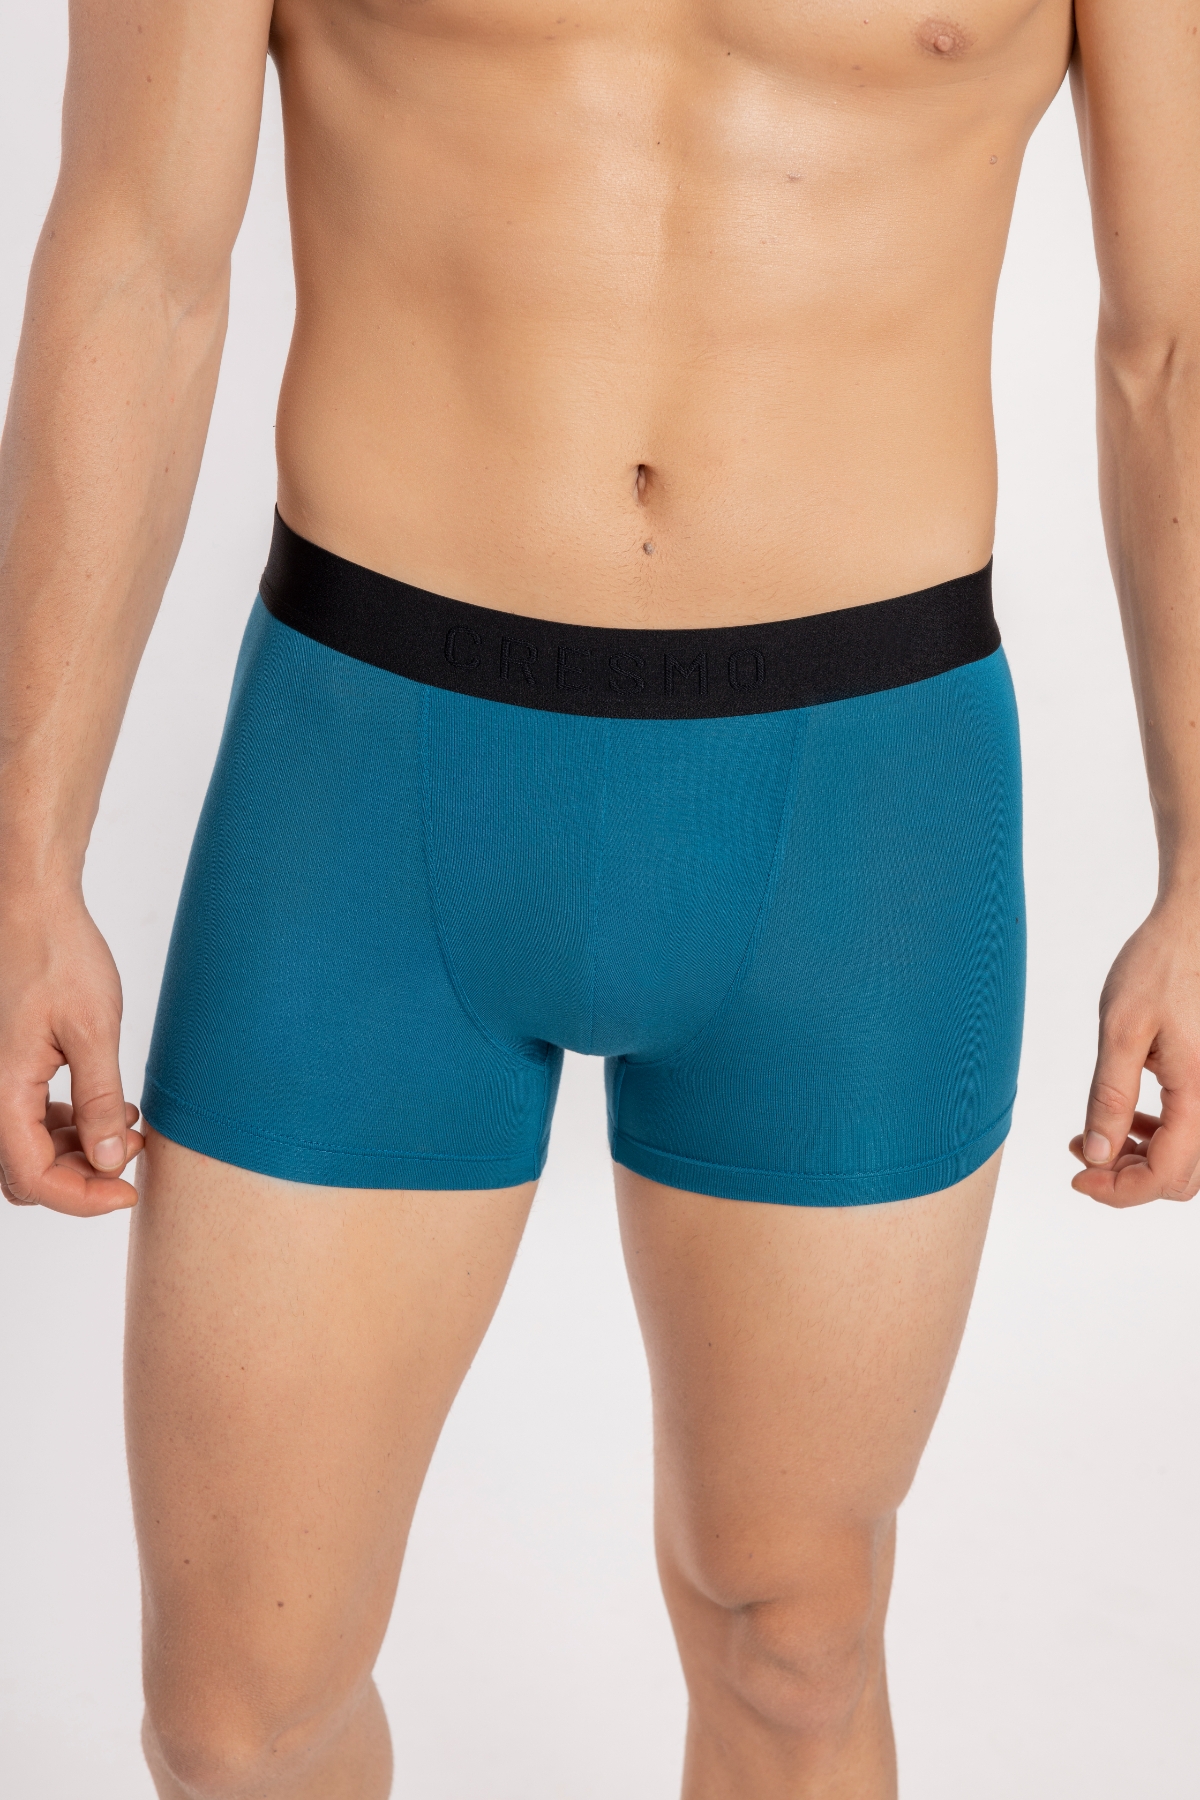 CRESMO | CRESMO Men's Anti-Microbial Micro Modal Underwear Breathable Ultra Soft Trunk (Pack Of 2) 3